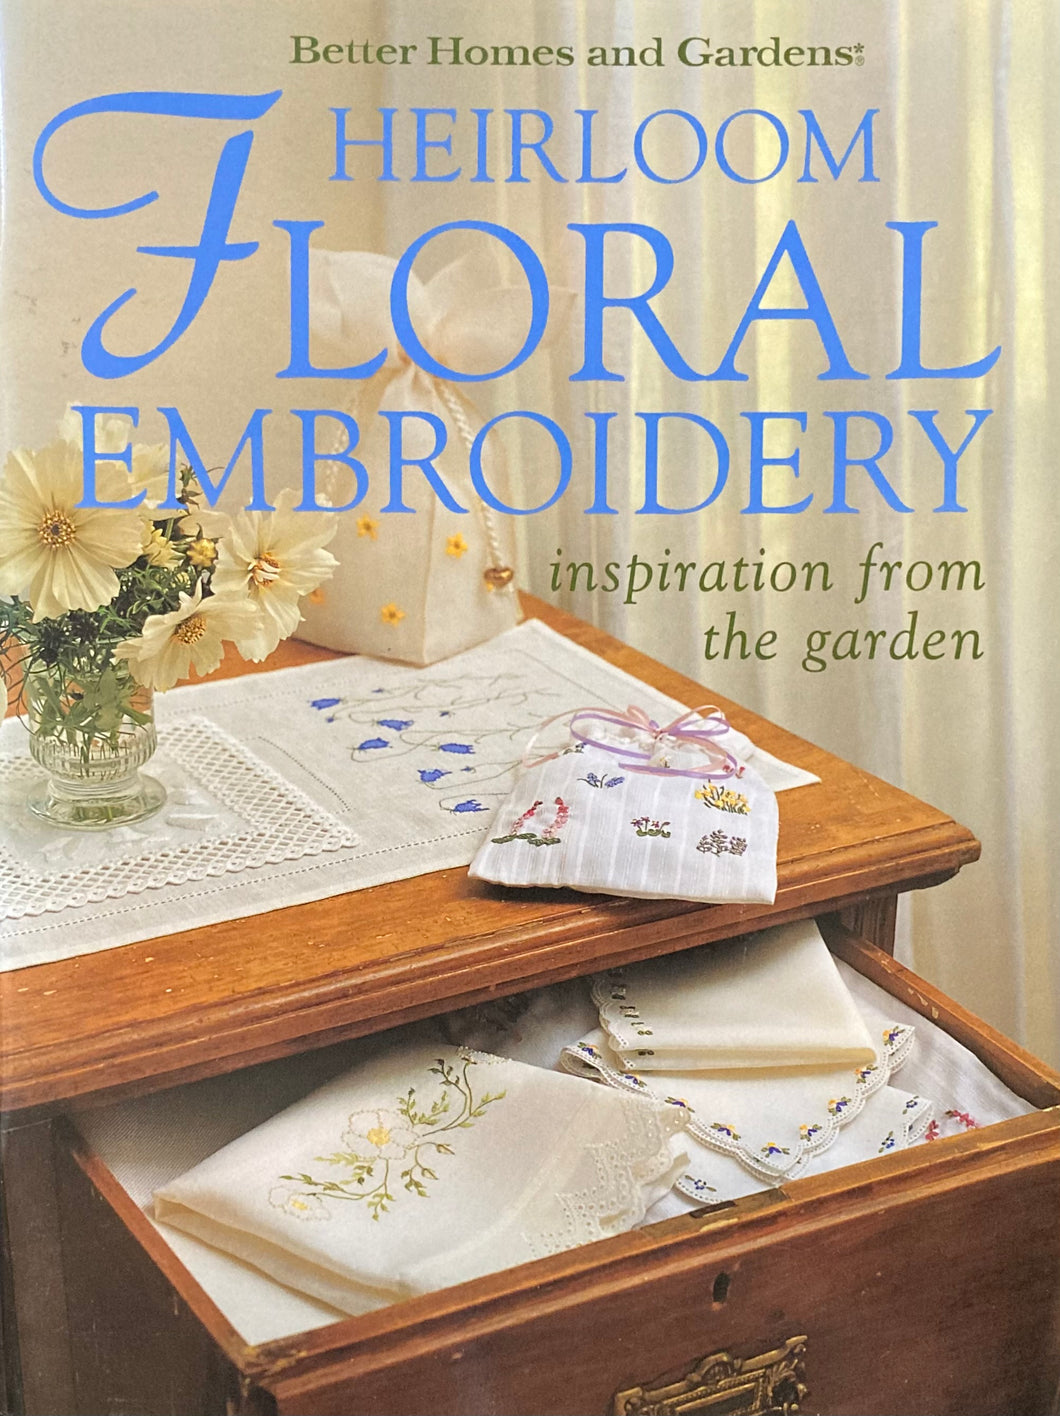 Better Homes and Gardens Heirloom Floral Embroidery